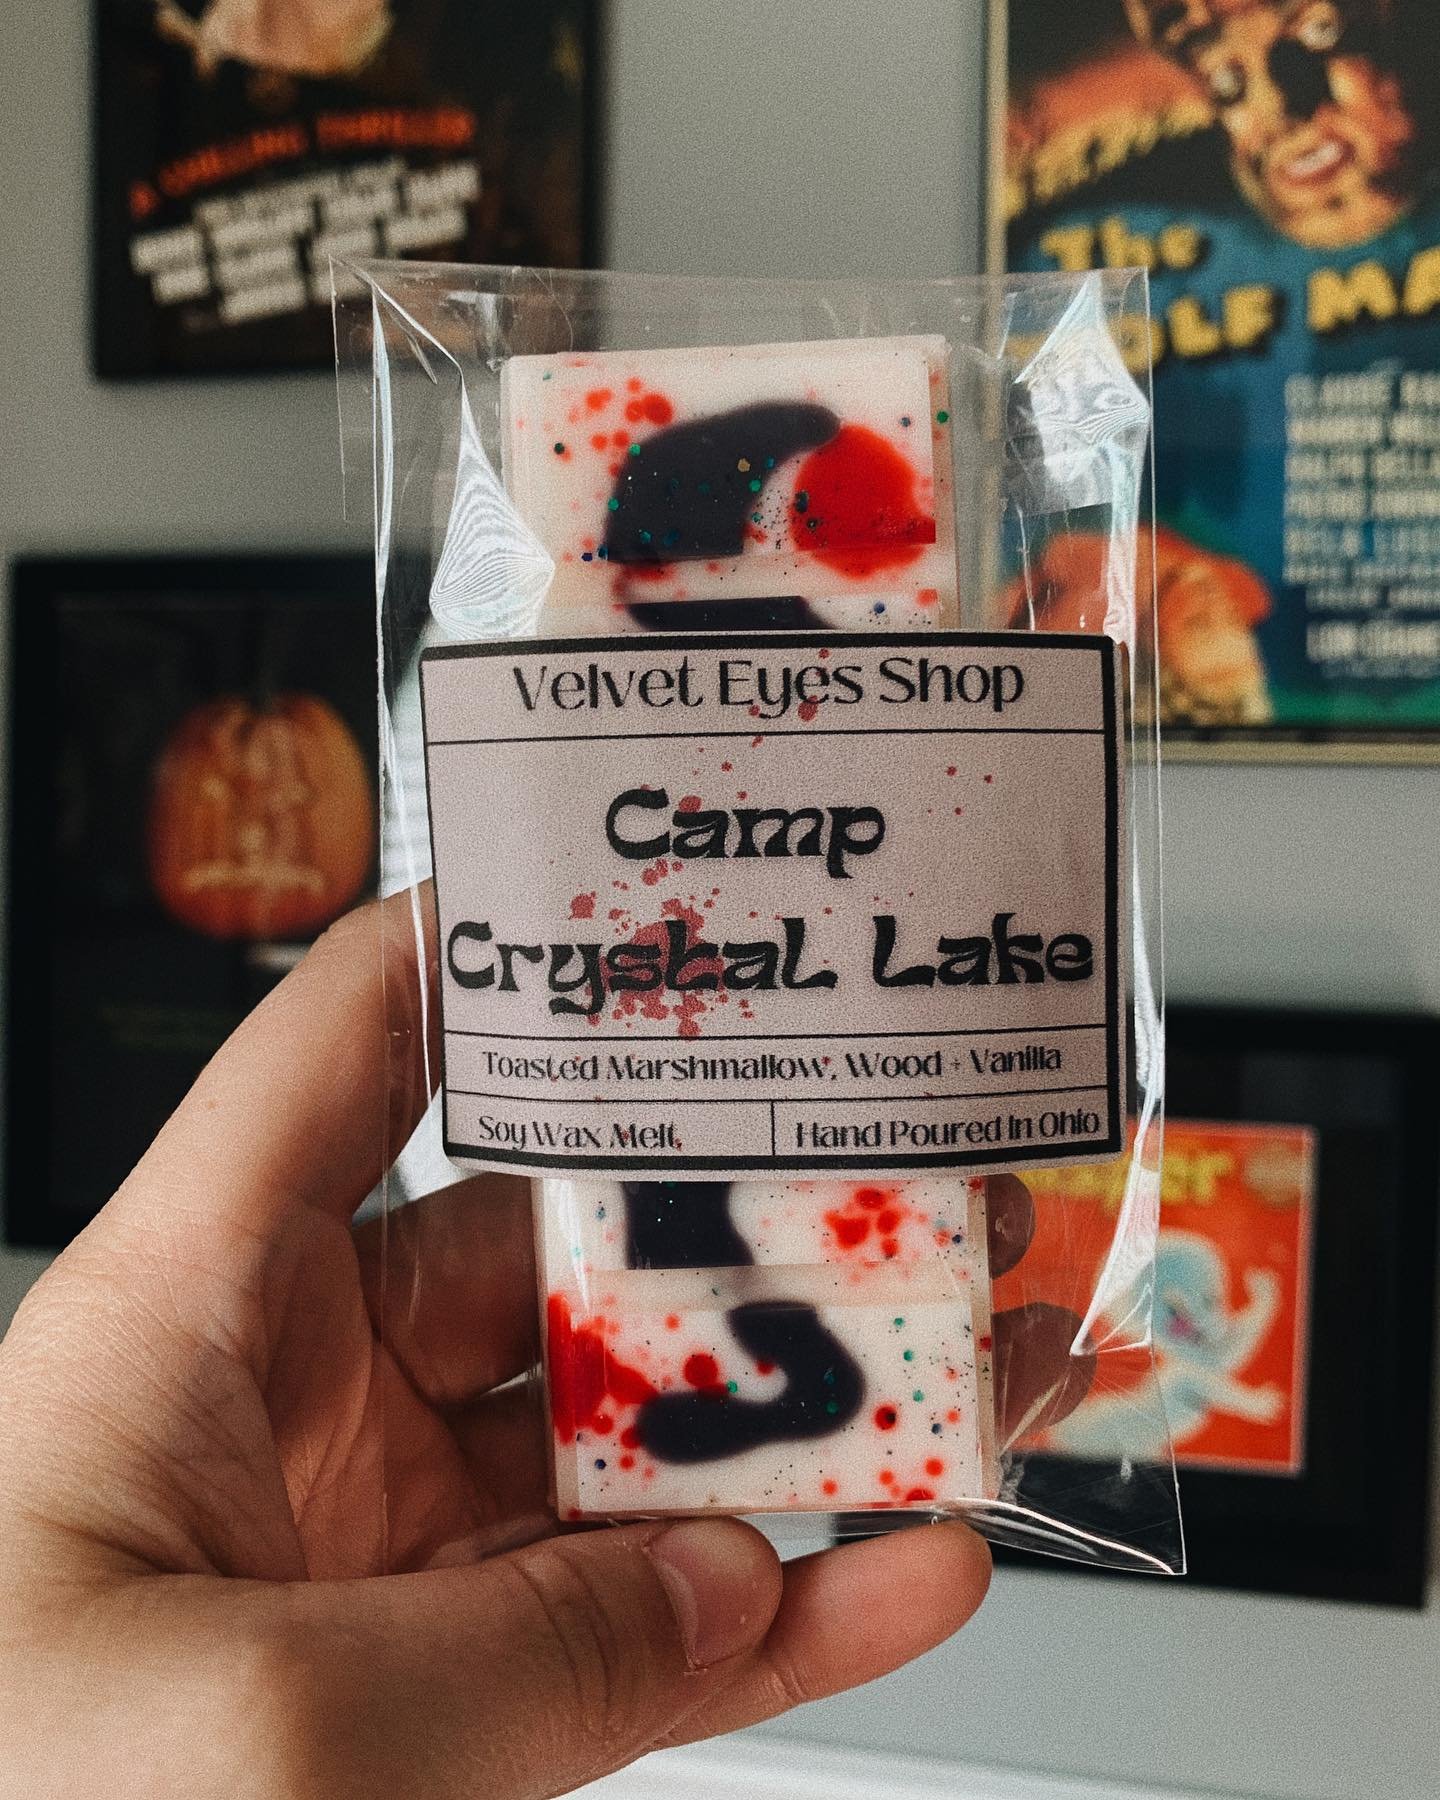 🖤 HORROR WAX MELT RESTOCK 🖤
this is the last you&rsquo;ll be seeing of these horror wax melt labels! i just restocked them for the last time over on our website! 🫶🏼
i&rsquo;ve been slowly working on redesigning all of our labels &amp; wax melt de